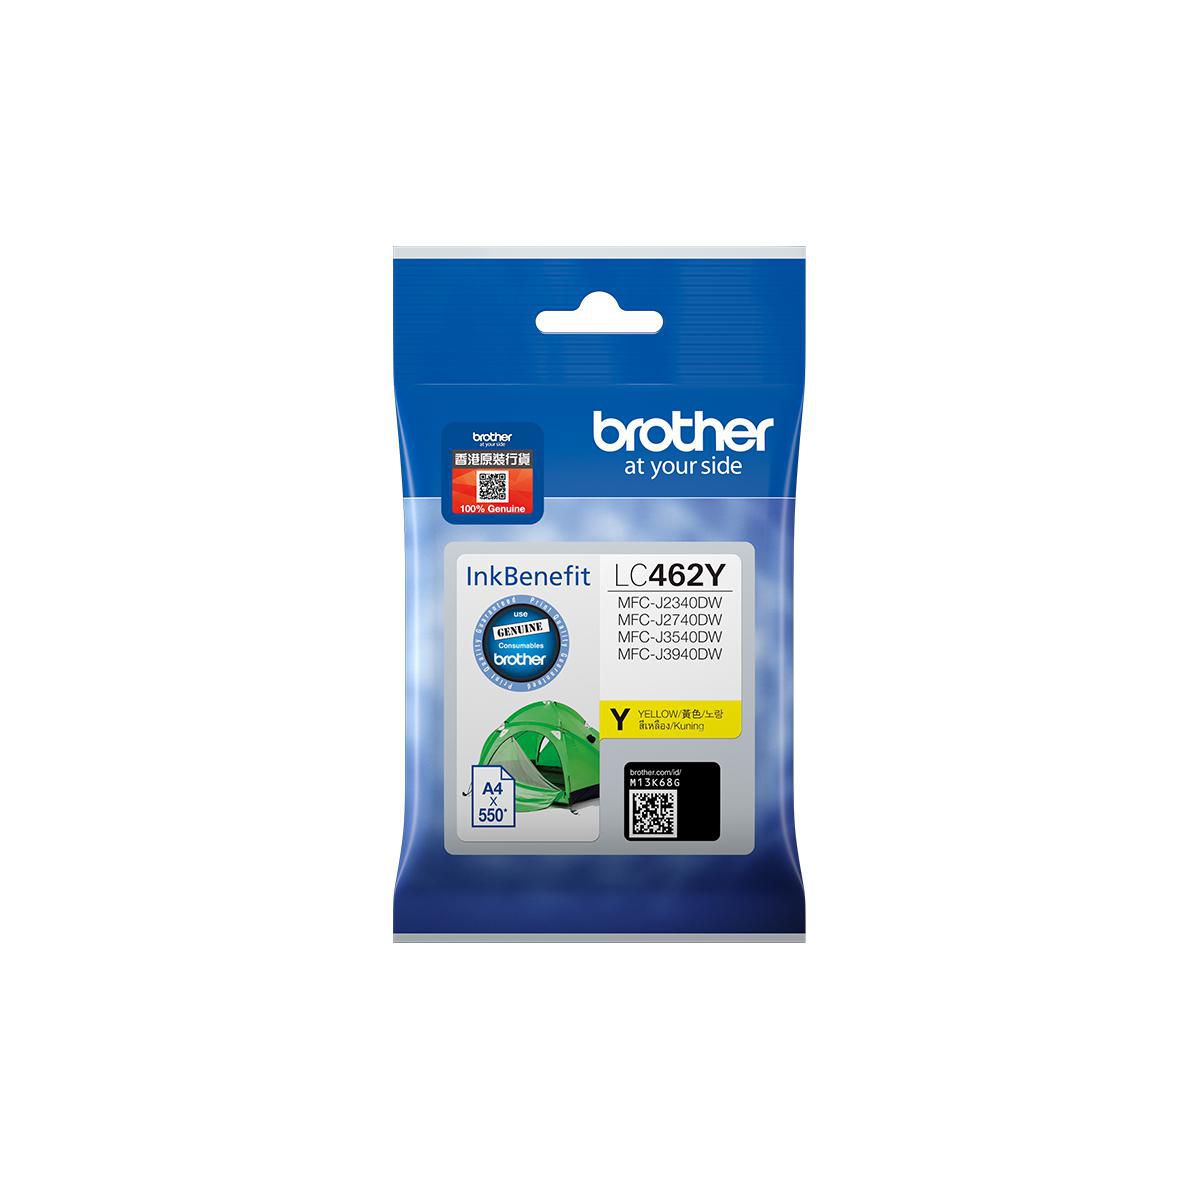 W128601061 Brother LC462Y ink cartridge 